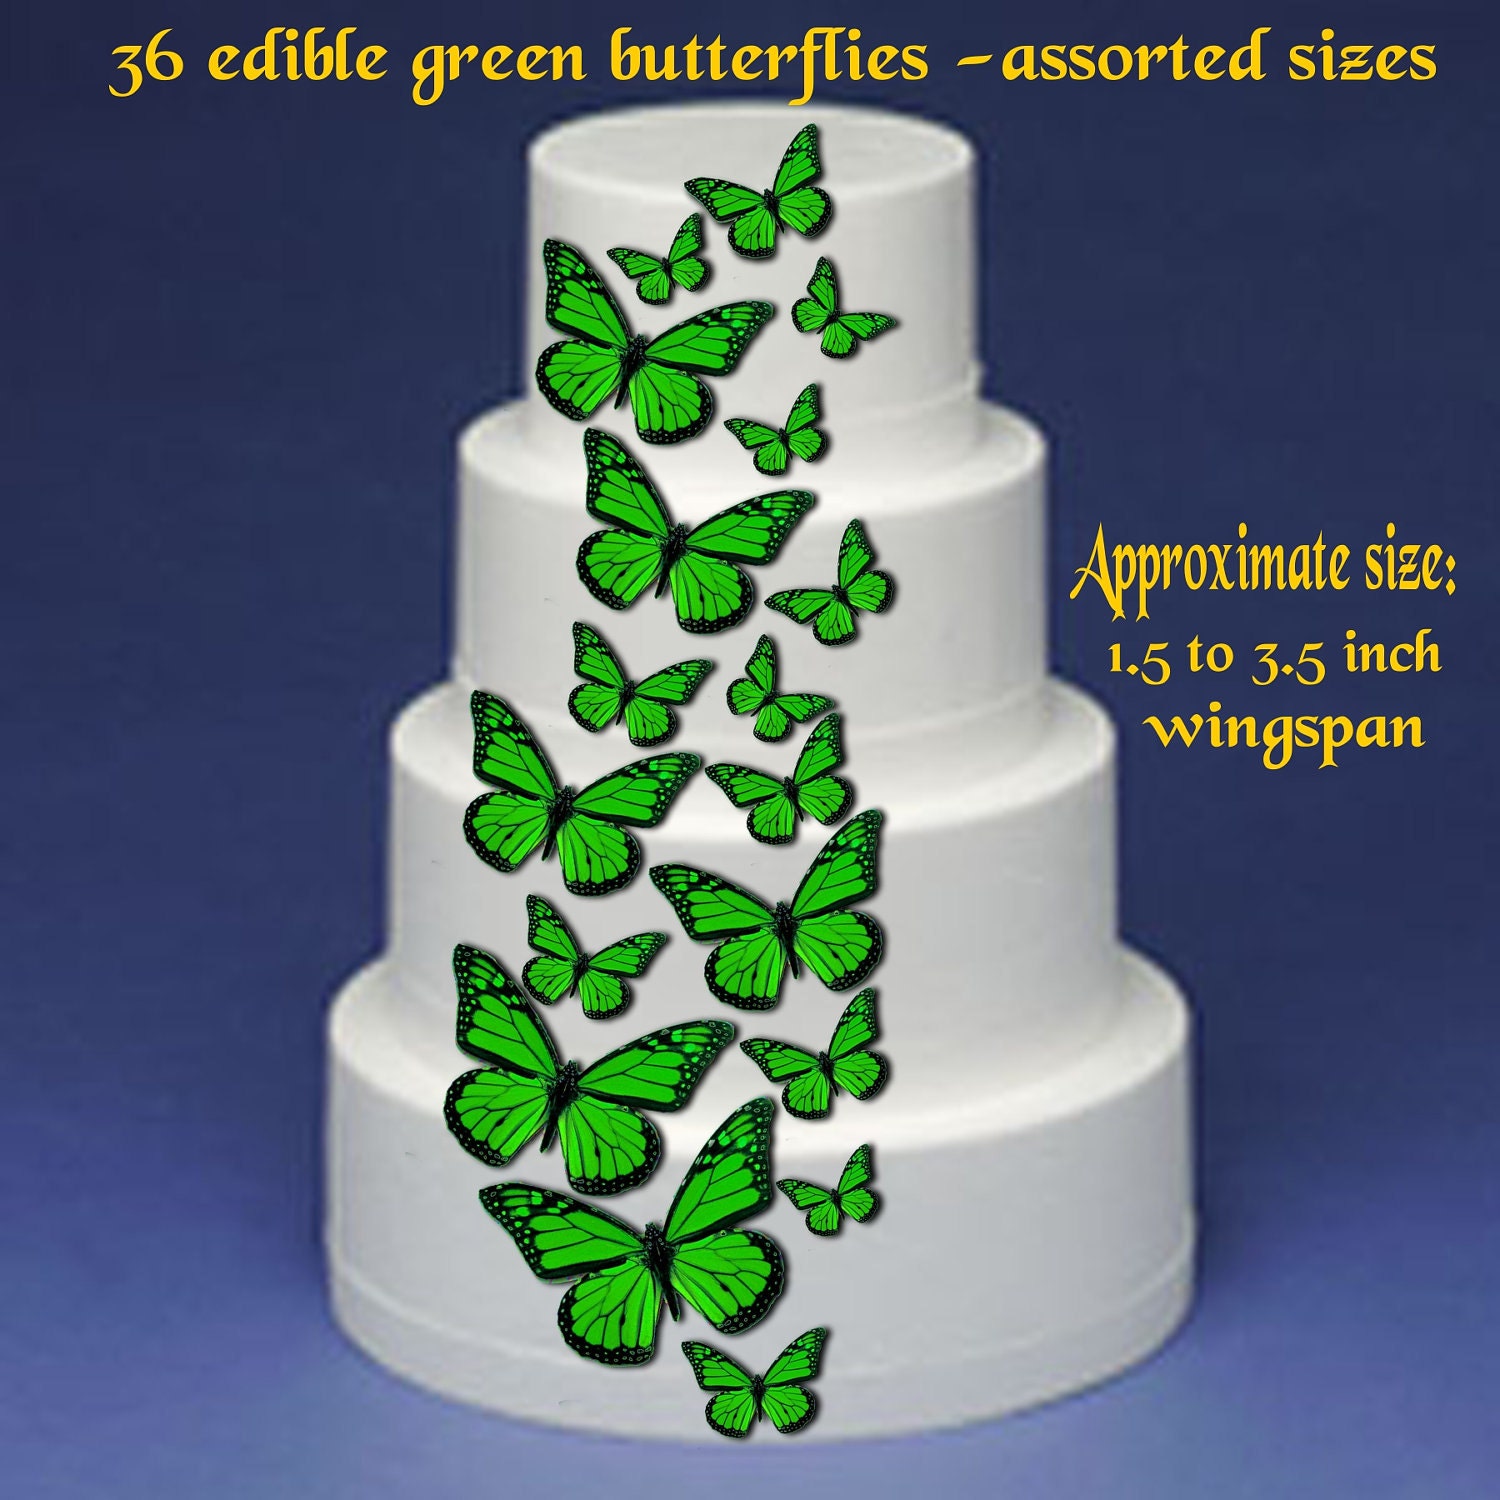 How To Make Butterflies Out Of Wafer Paper